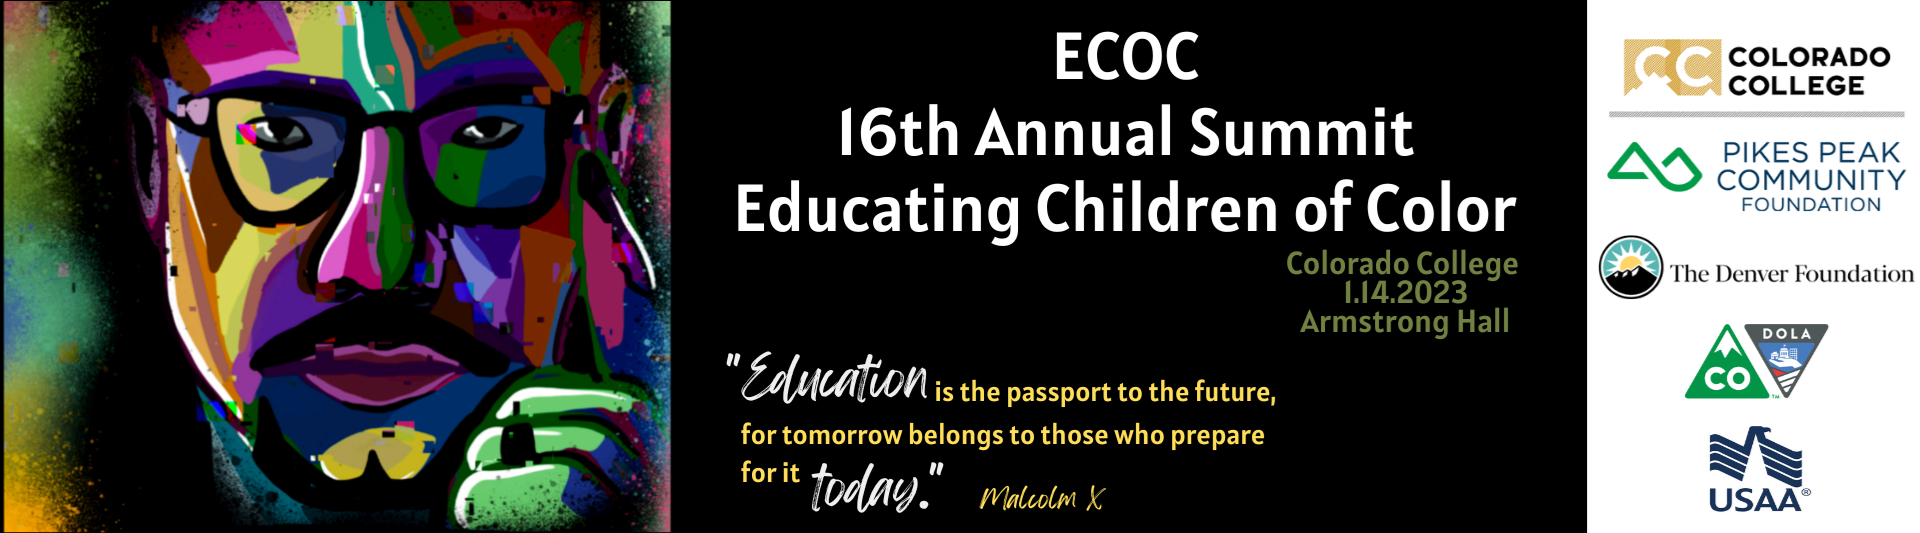 ECOC  2023 Annual Summit - Culturally & Linguistically Diverse Education Session: Recapturing Learning Loss for Culturally and Linguistically Diverse Students